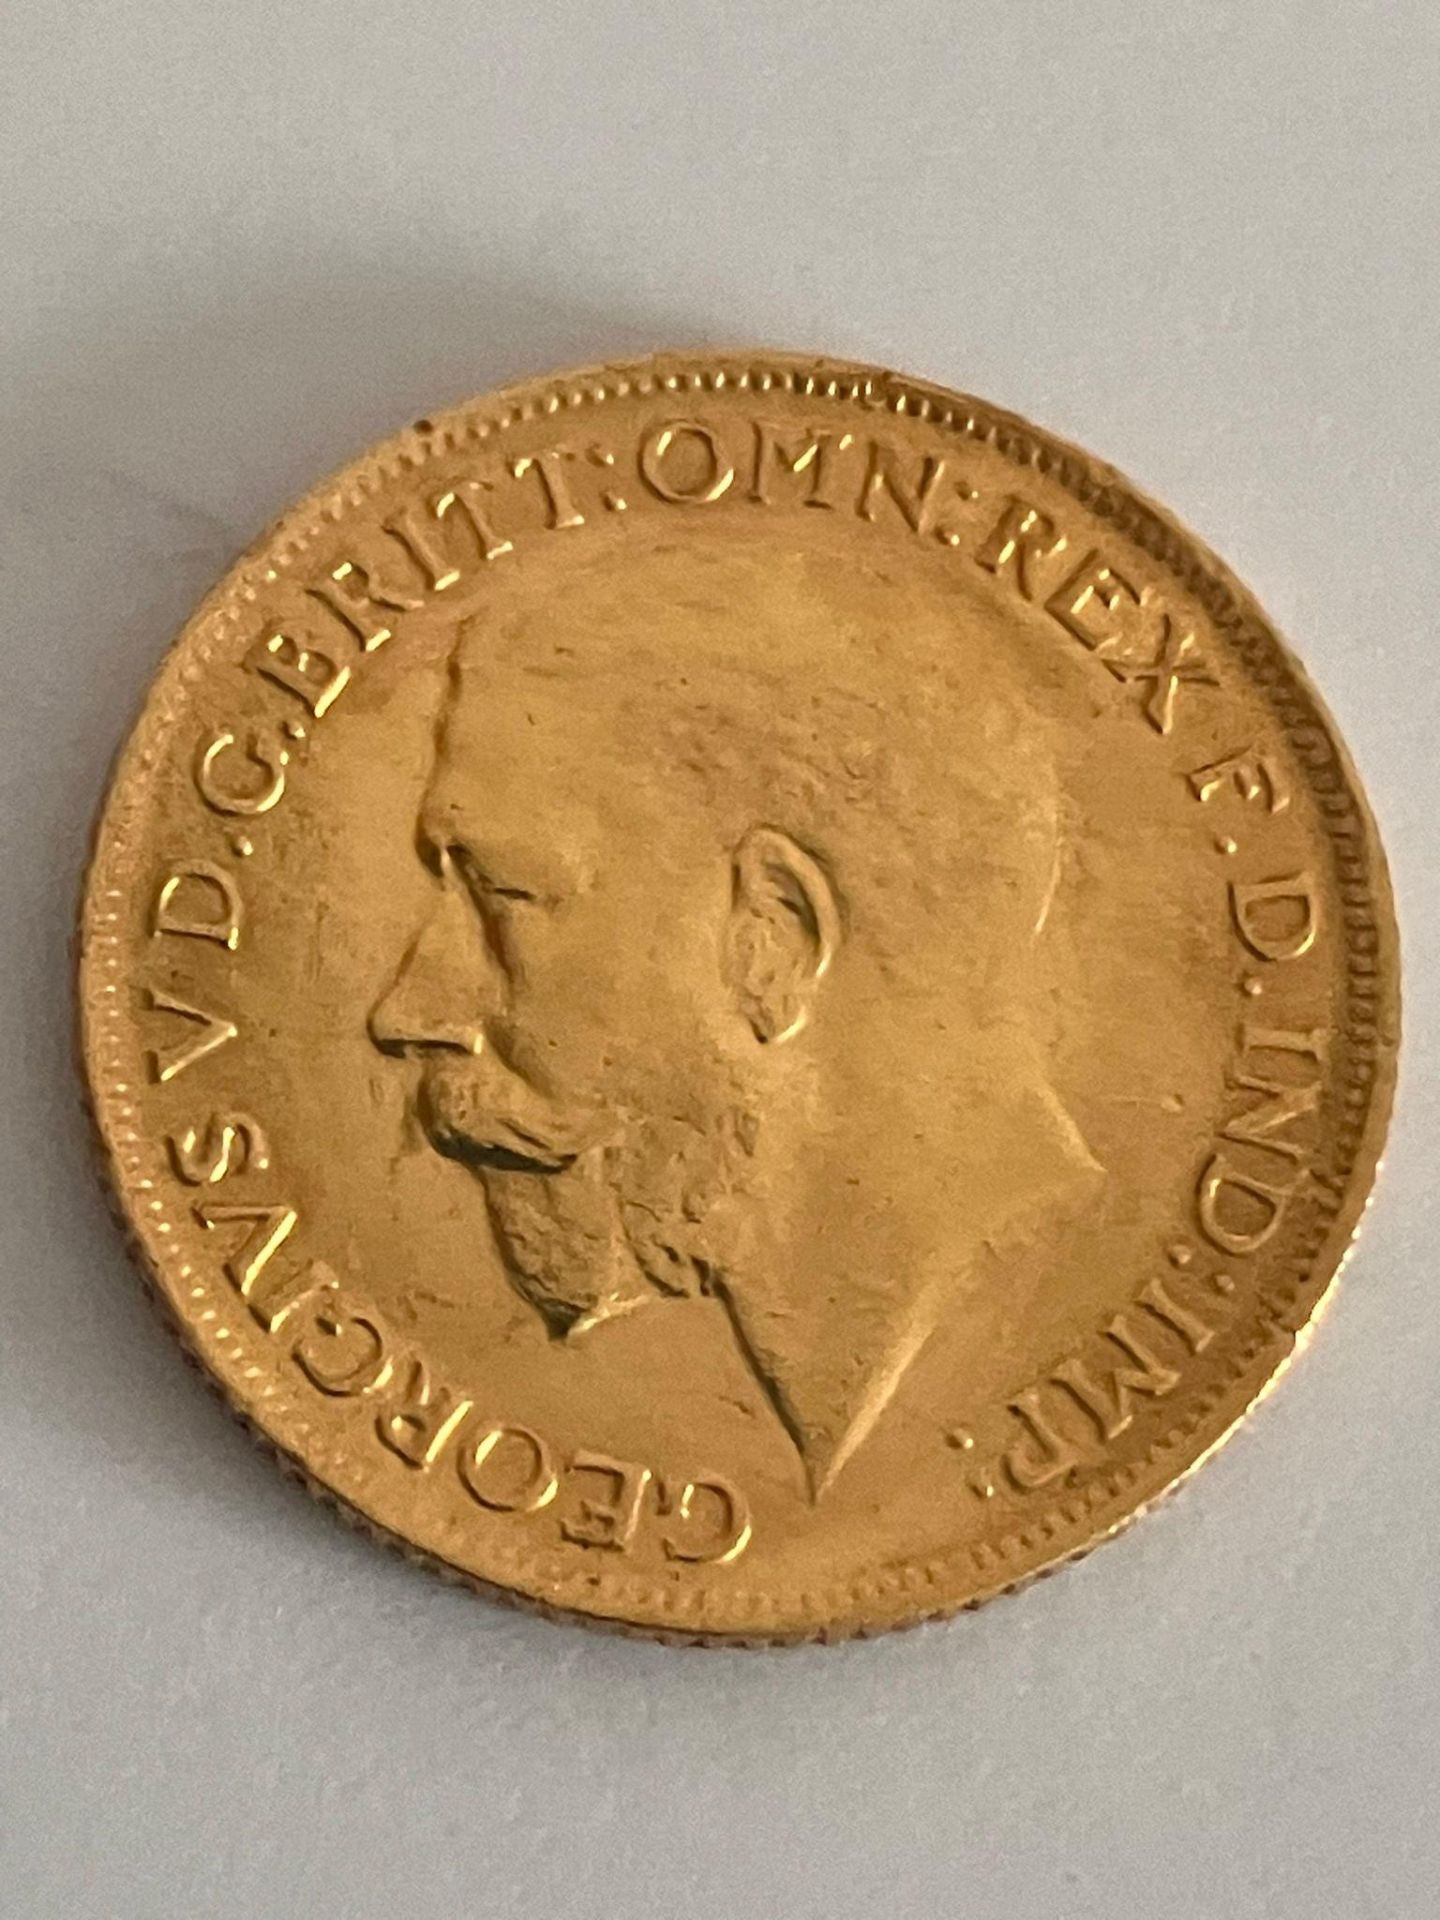 1913 GOLD SOVEREIGN. Extra fine /Brilliant condition. Please see photos. - Image 2 of 2